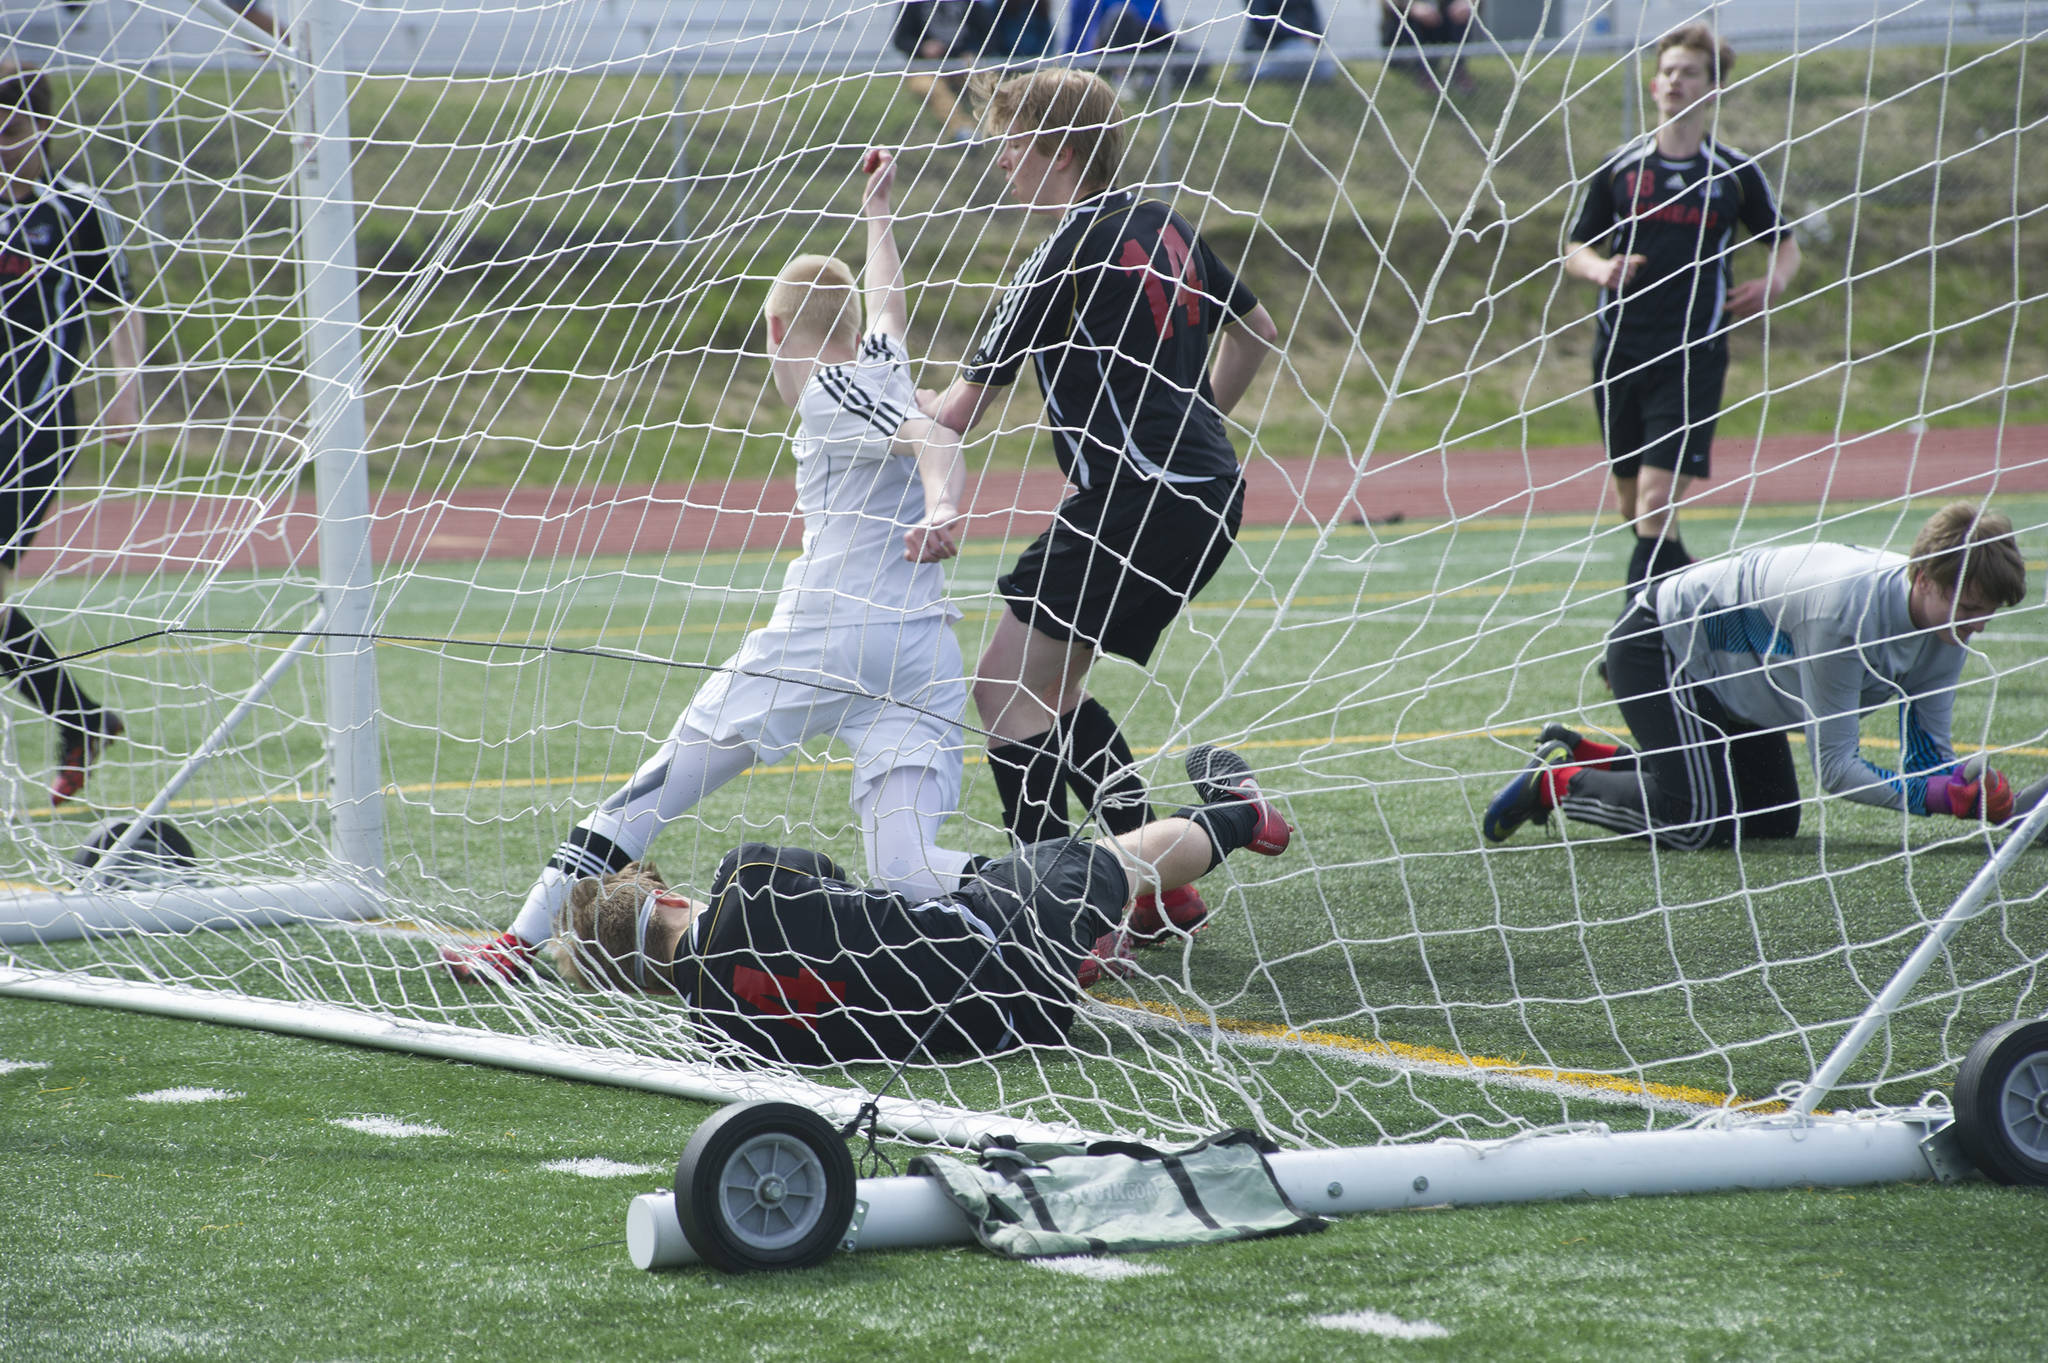 Kenai Central High School’s Leif Lofquist celebrates his goal as Juneau-Douglas High School’s Will Hoover, bottom, and Ezra Geselle, middle, follow him into the net in the ASAA Division II boys soccer state championship game on Saturday, May 26, 2018, at Service High School in Anchorage. (Nolin Ainsworth | Juneau Empire)